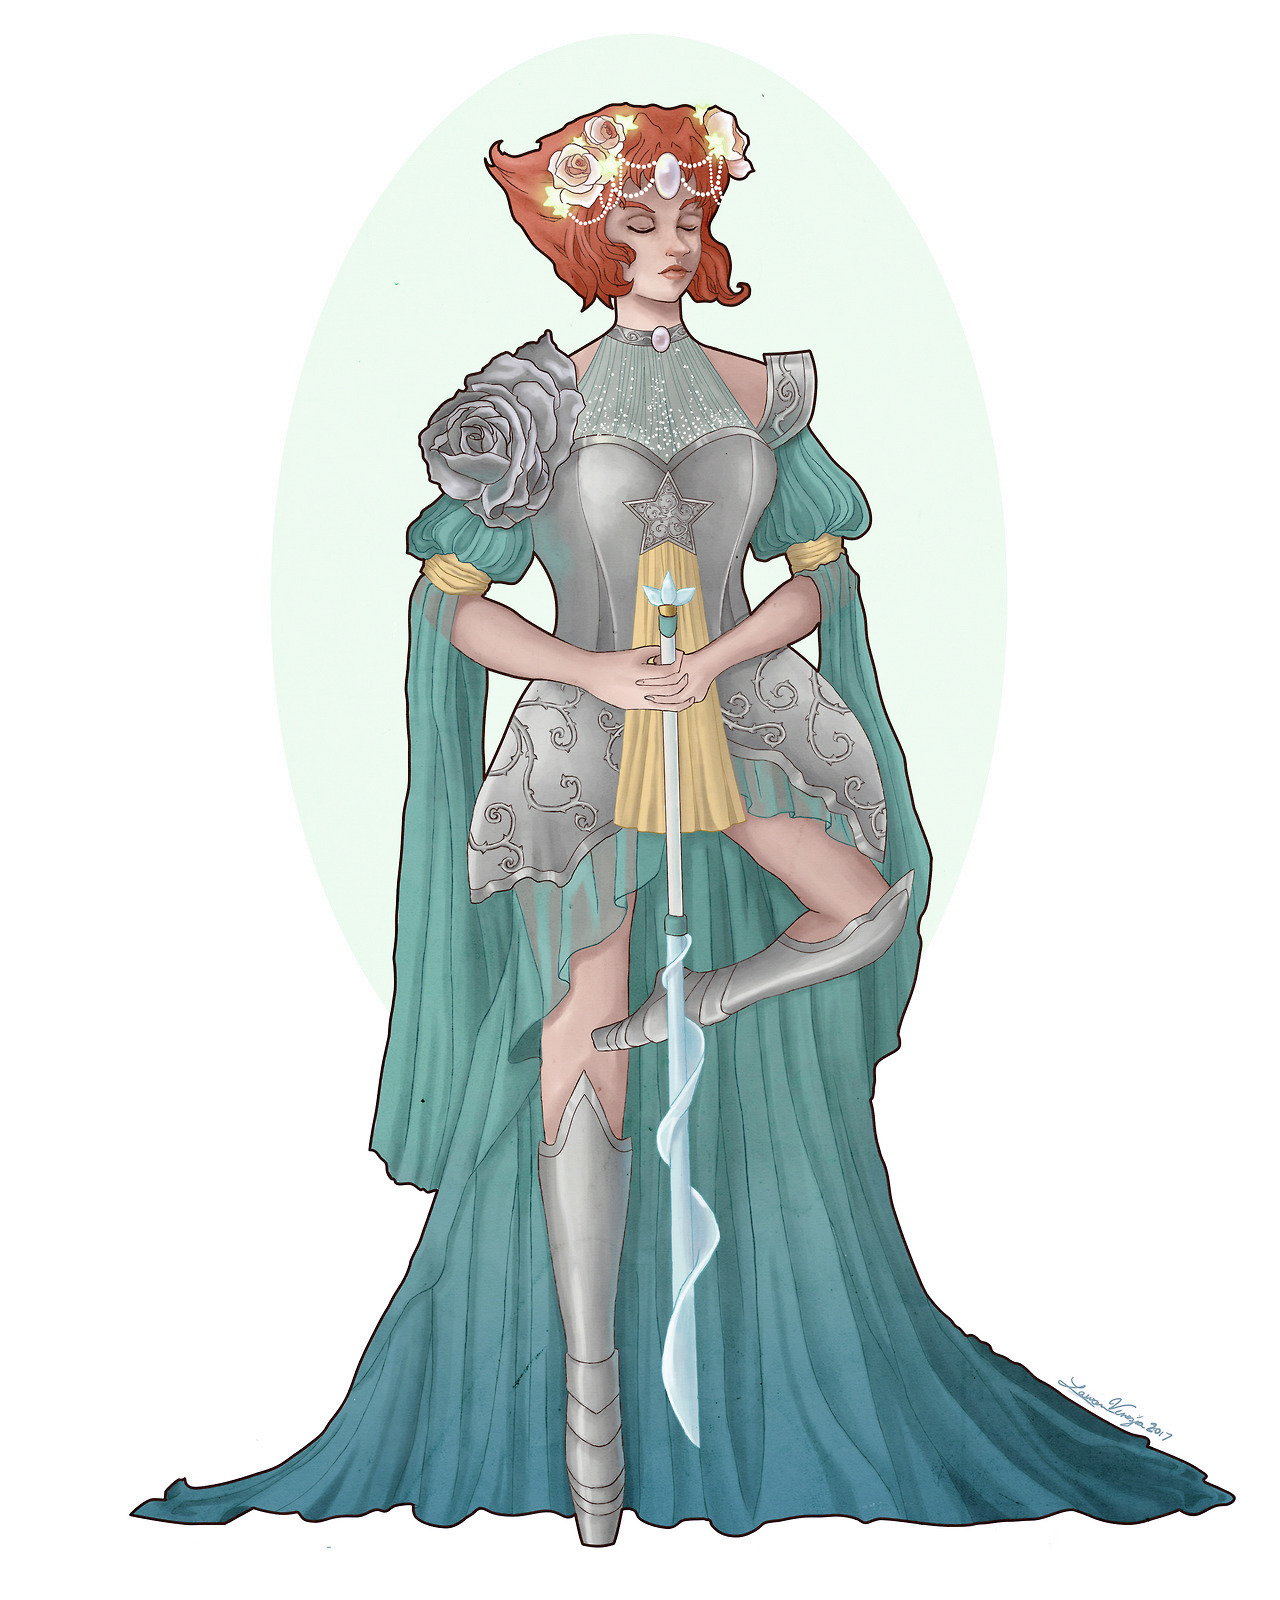 Reuploading Pearl again. For some reason theres always been a huge difference between the color pallette I actually painted and the way it looks on mobile devices, so I edited her to look as close to the original as i could. If she looks teal now and not ACID GREEN to you, I have done my job.